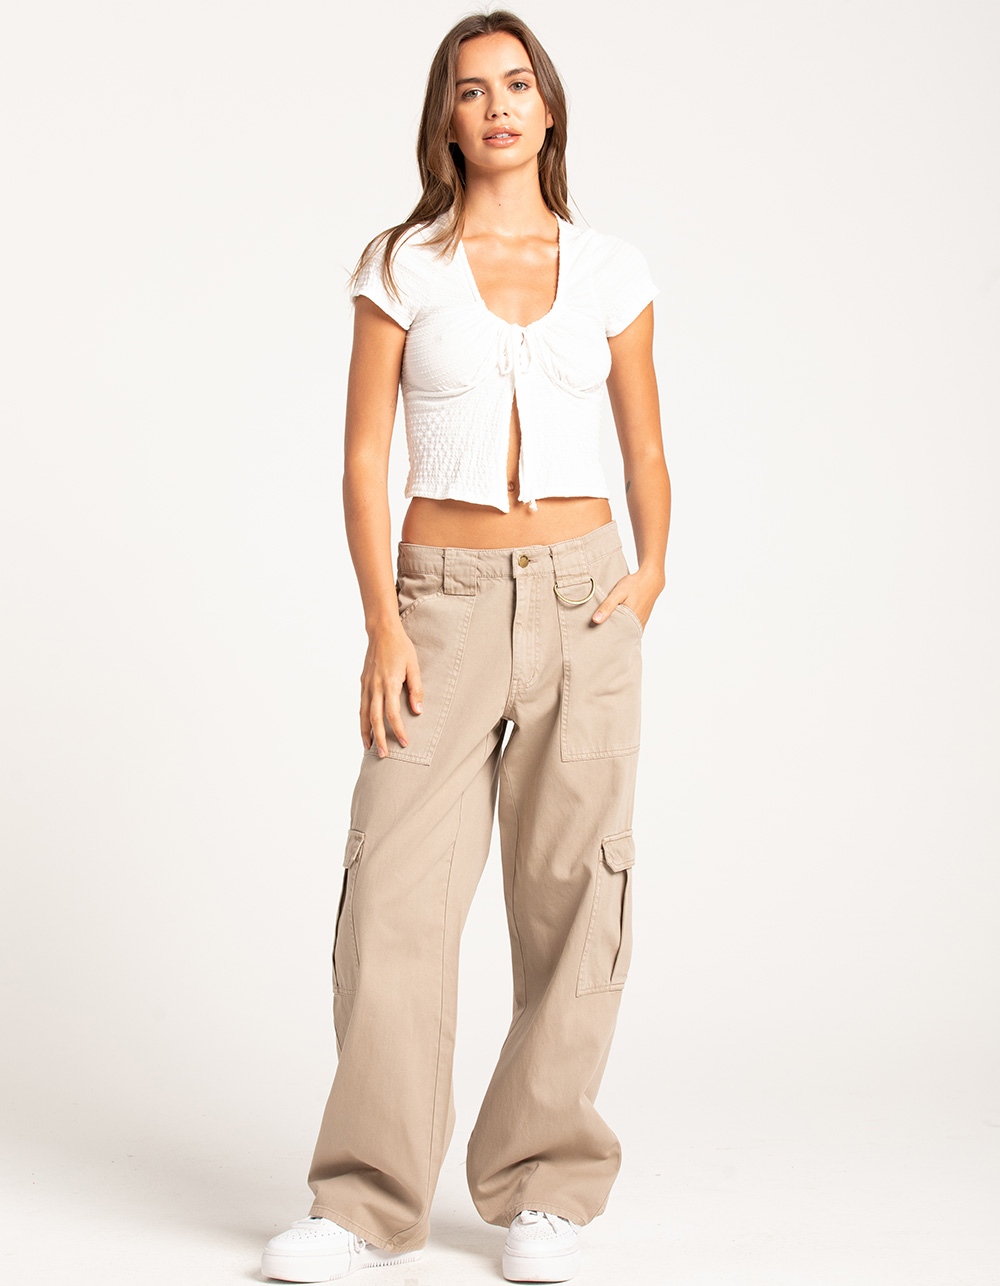 Black Cargo Pants For Women  Buy Online  Best Price in Nigeria  Jumia NG